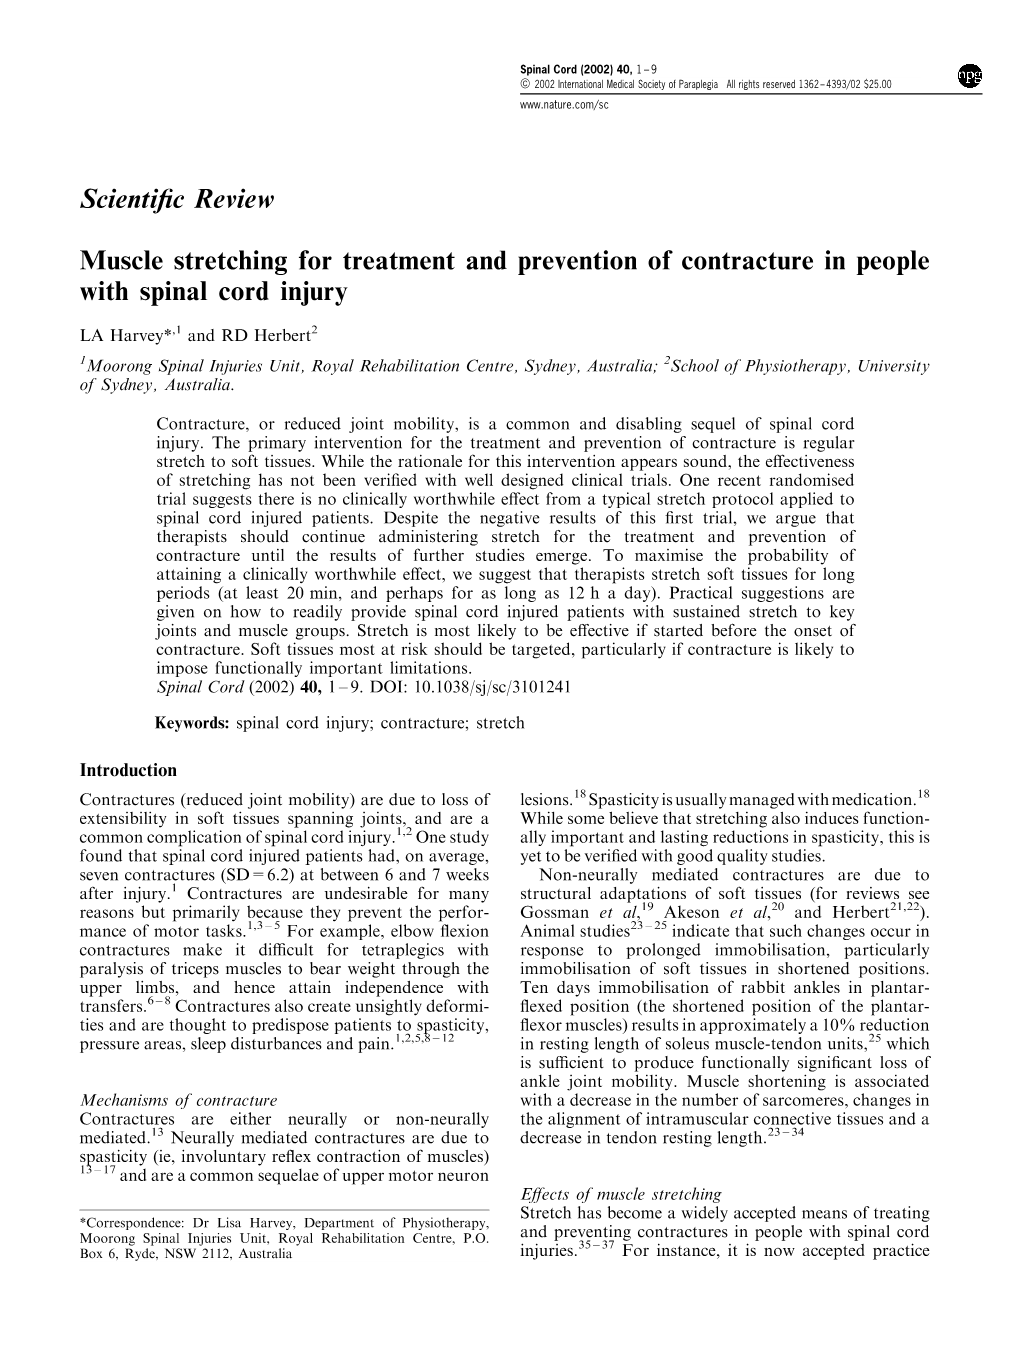 Scienti®C Review Muscle Stretching for Treatment and Prevention of Contracture in People with Spinal Cord Injury